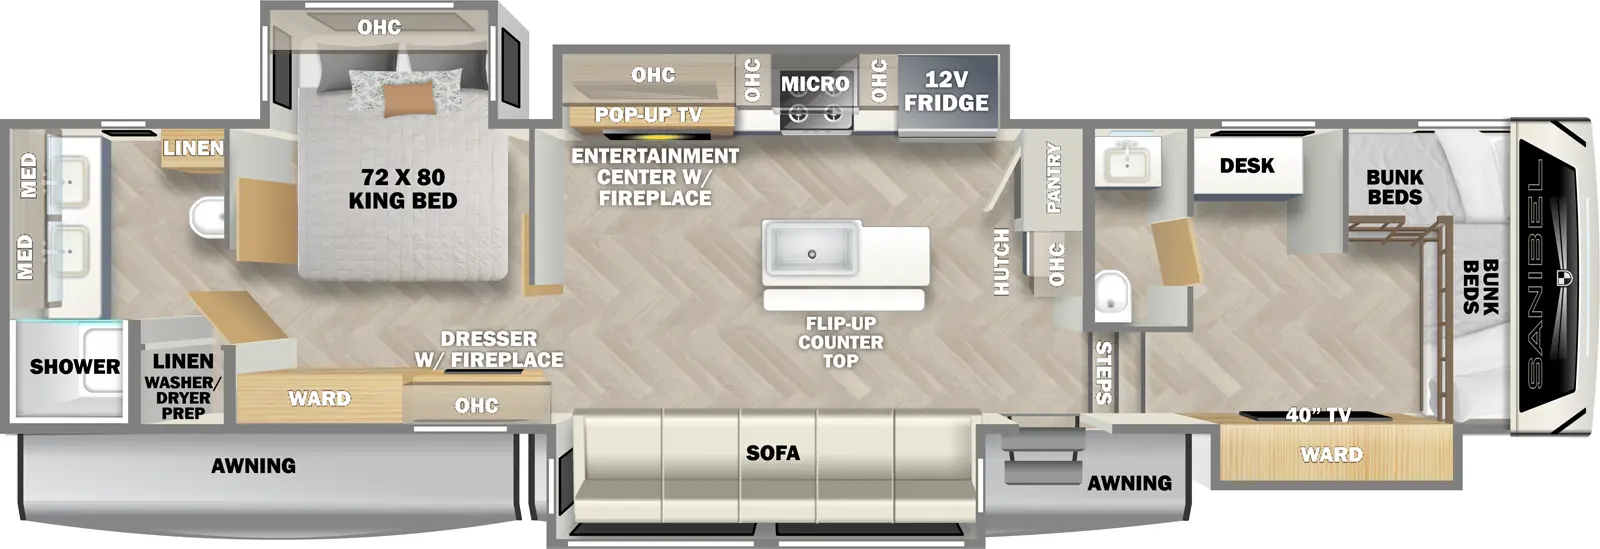 The 3952FBWB has one entry and three slideouts. Exterior features two awnings. Interior layout front to back: front bunk room with bunk beds along front and off-door side wall, door side wardrobe slideout with TV, off-door side desk, and off-door side half bathroom; two steps down to main living area and entry door; hutch with overhead cabinet and pantry along inner wall; off-door side slideout with 12 Volt refrigerator, overhead cabinet, microwave, cooktop, entertainment center with pop-up TV, overhead cabinets, and fireplace below; door side sofa slideout; kitchen island with sink and flip-up counter top; bedroom with off-door side king bed slideout and overhead cabinet, and door side dresser with fireplace, overhead cabinet, and wardrobe; rear full bathroom with two sinks and medicine cabinets, linen closet, and linen closet with washer/dryer prep.